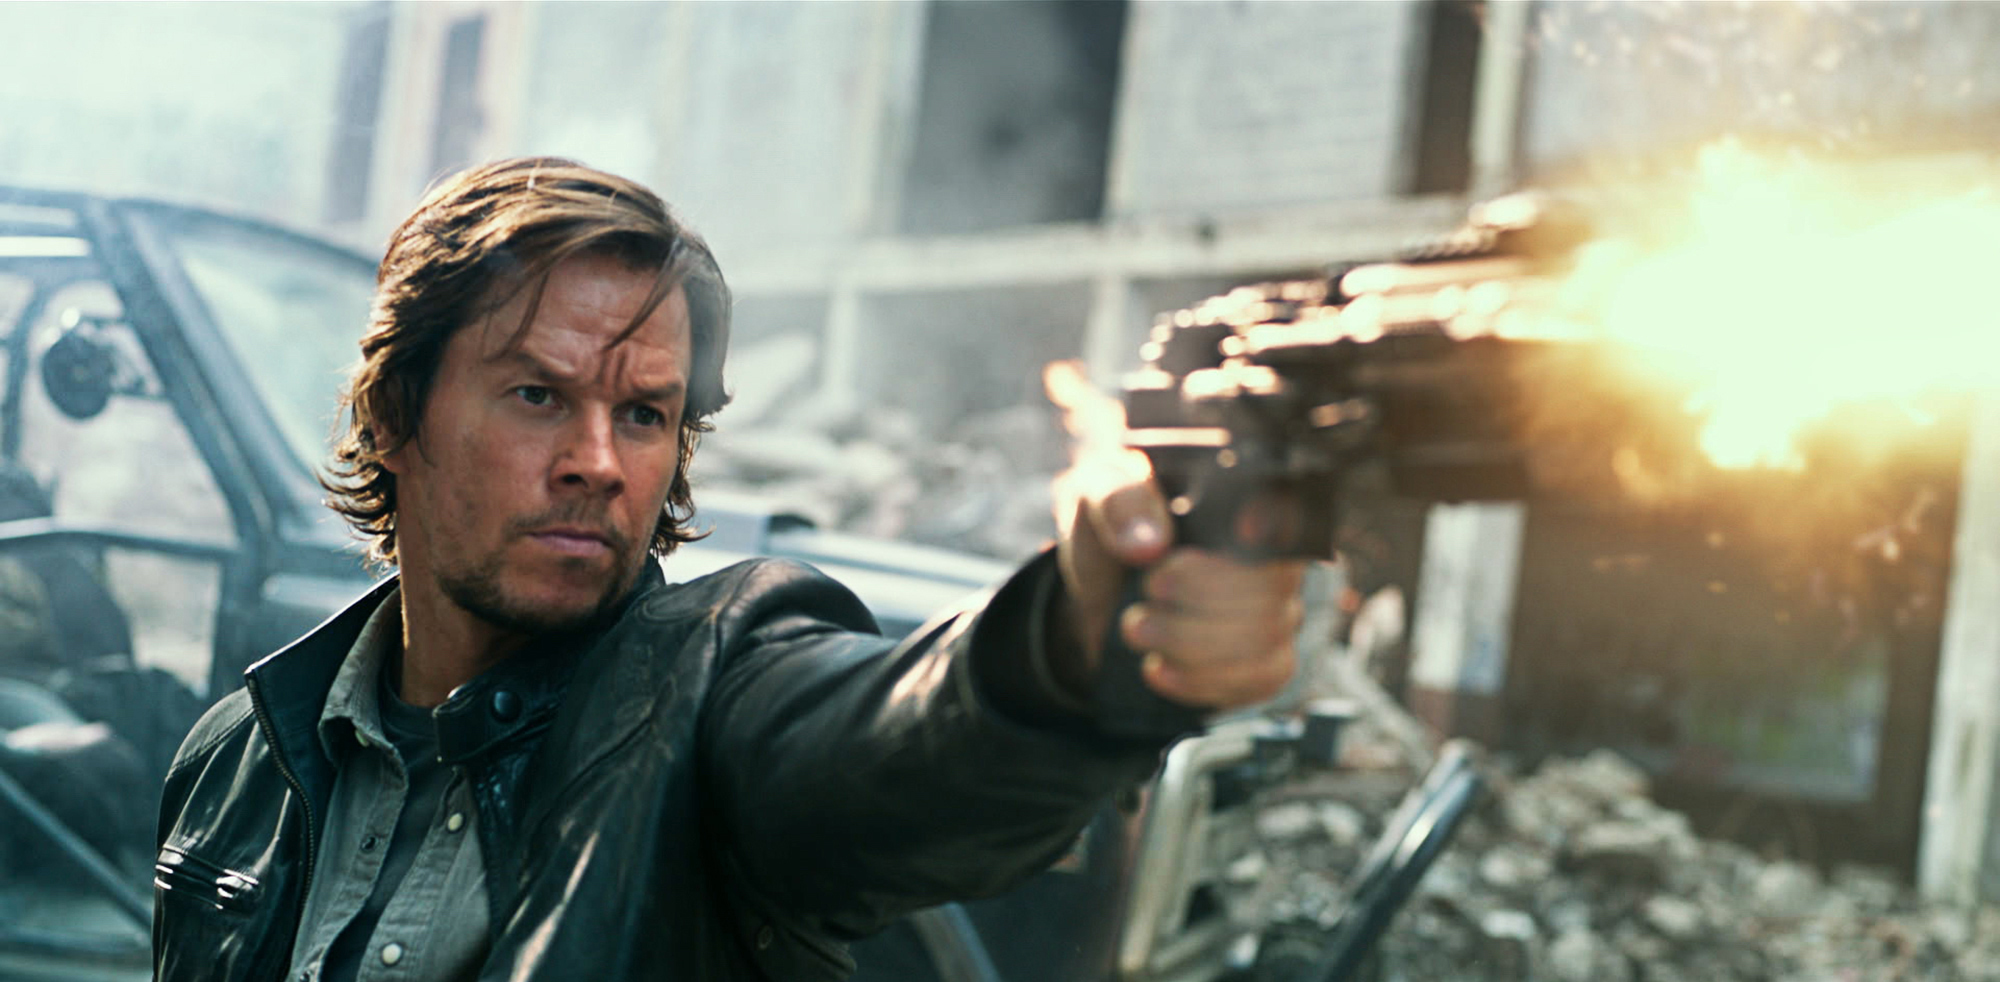 Mark Wahlberg as Cade Yeager in Transformers: The Last Knight